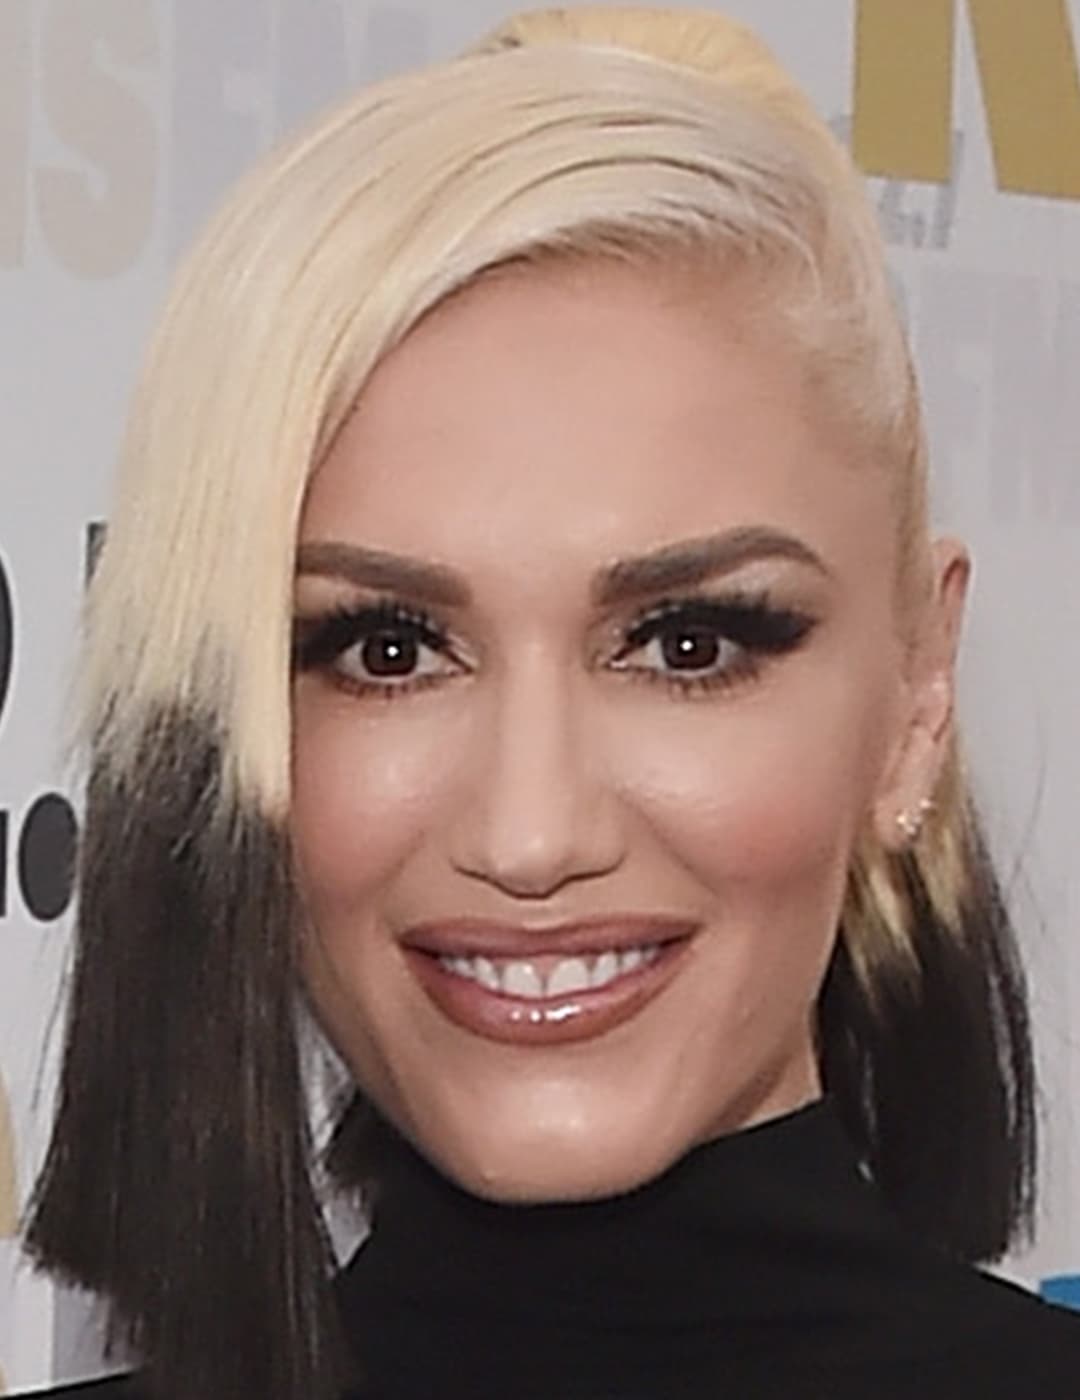 A photo of Gwen Stefani with blonde hair and black ends